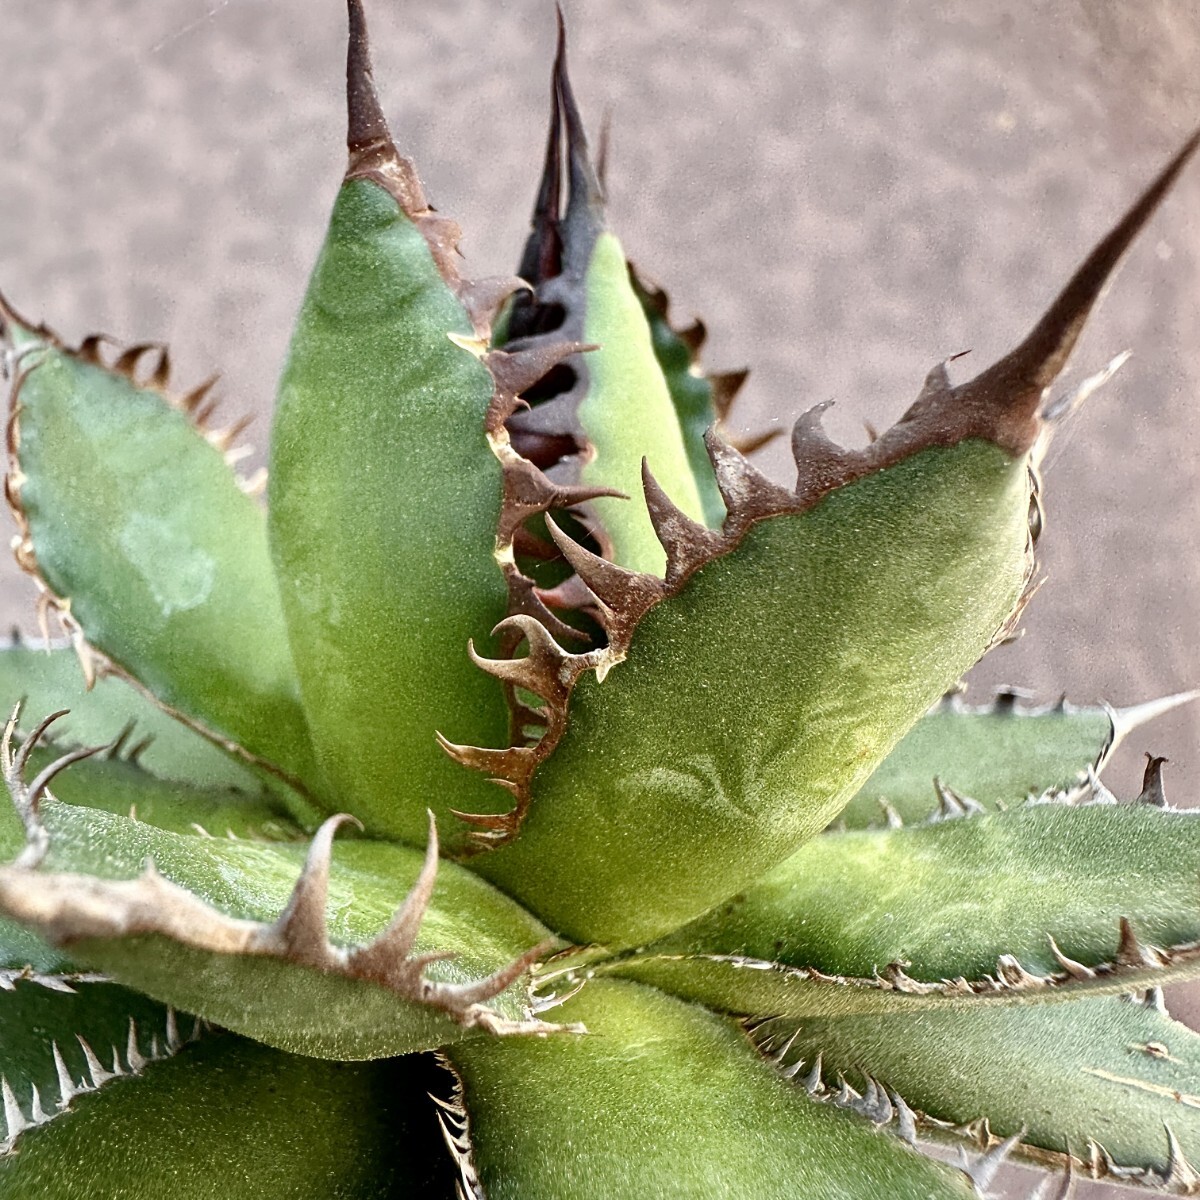 [Lj_plants]Z68 succulent plant agave a little over . Hori dahorrida finest quality a little over . finest quality beautiful stock 